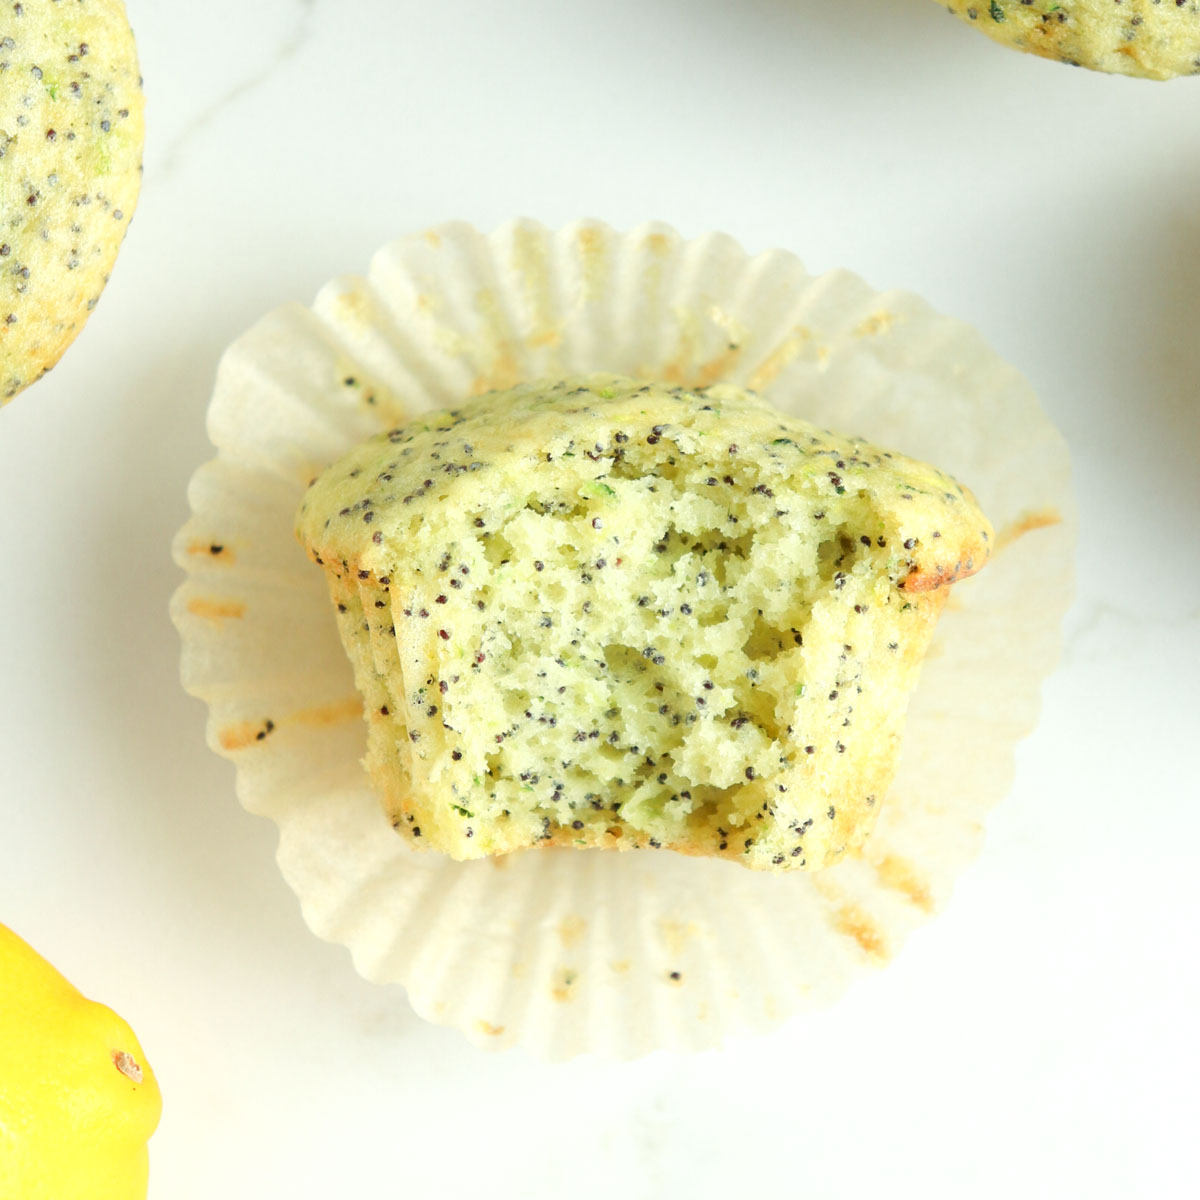 Zucchini lemon poppy seed muffin with a bite taken out of it.